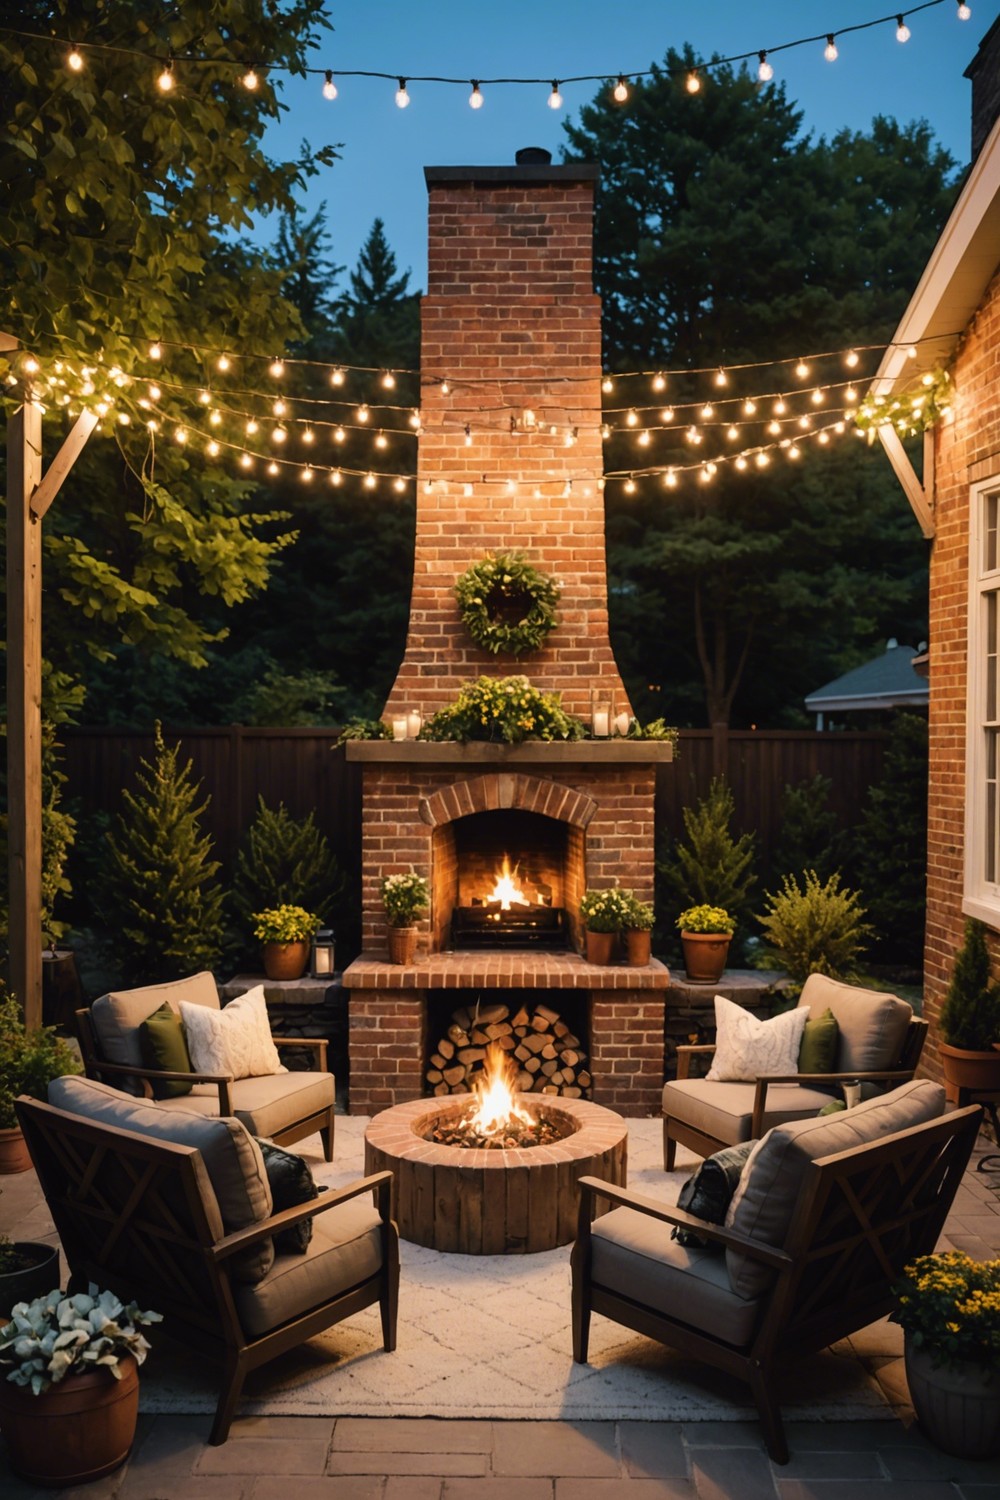 Classic Brick Fireplace with Outdoor Seating